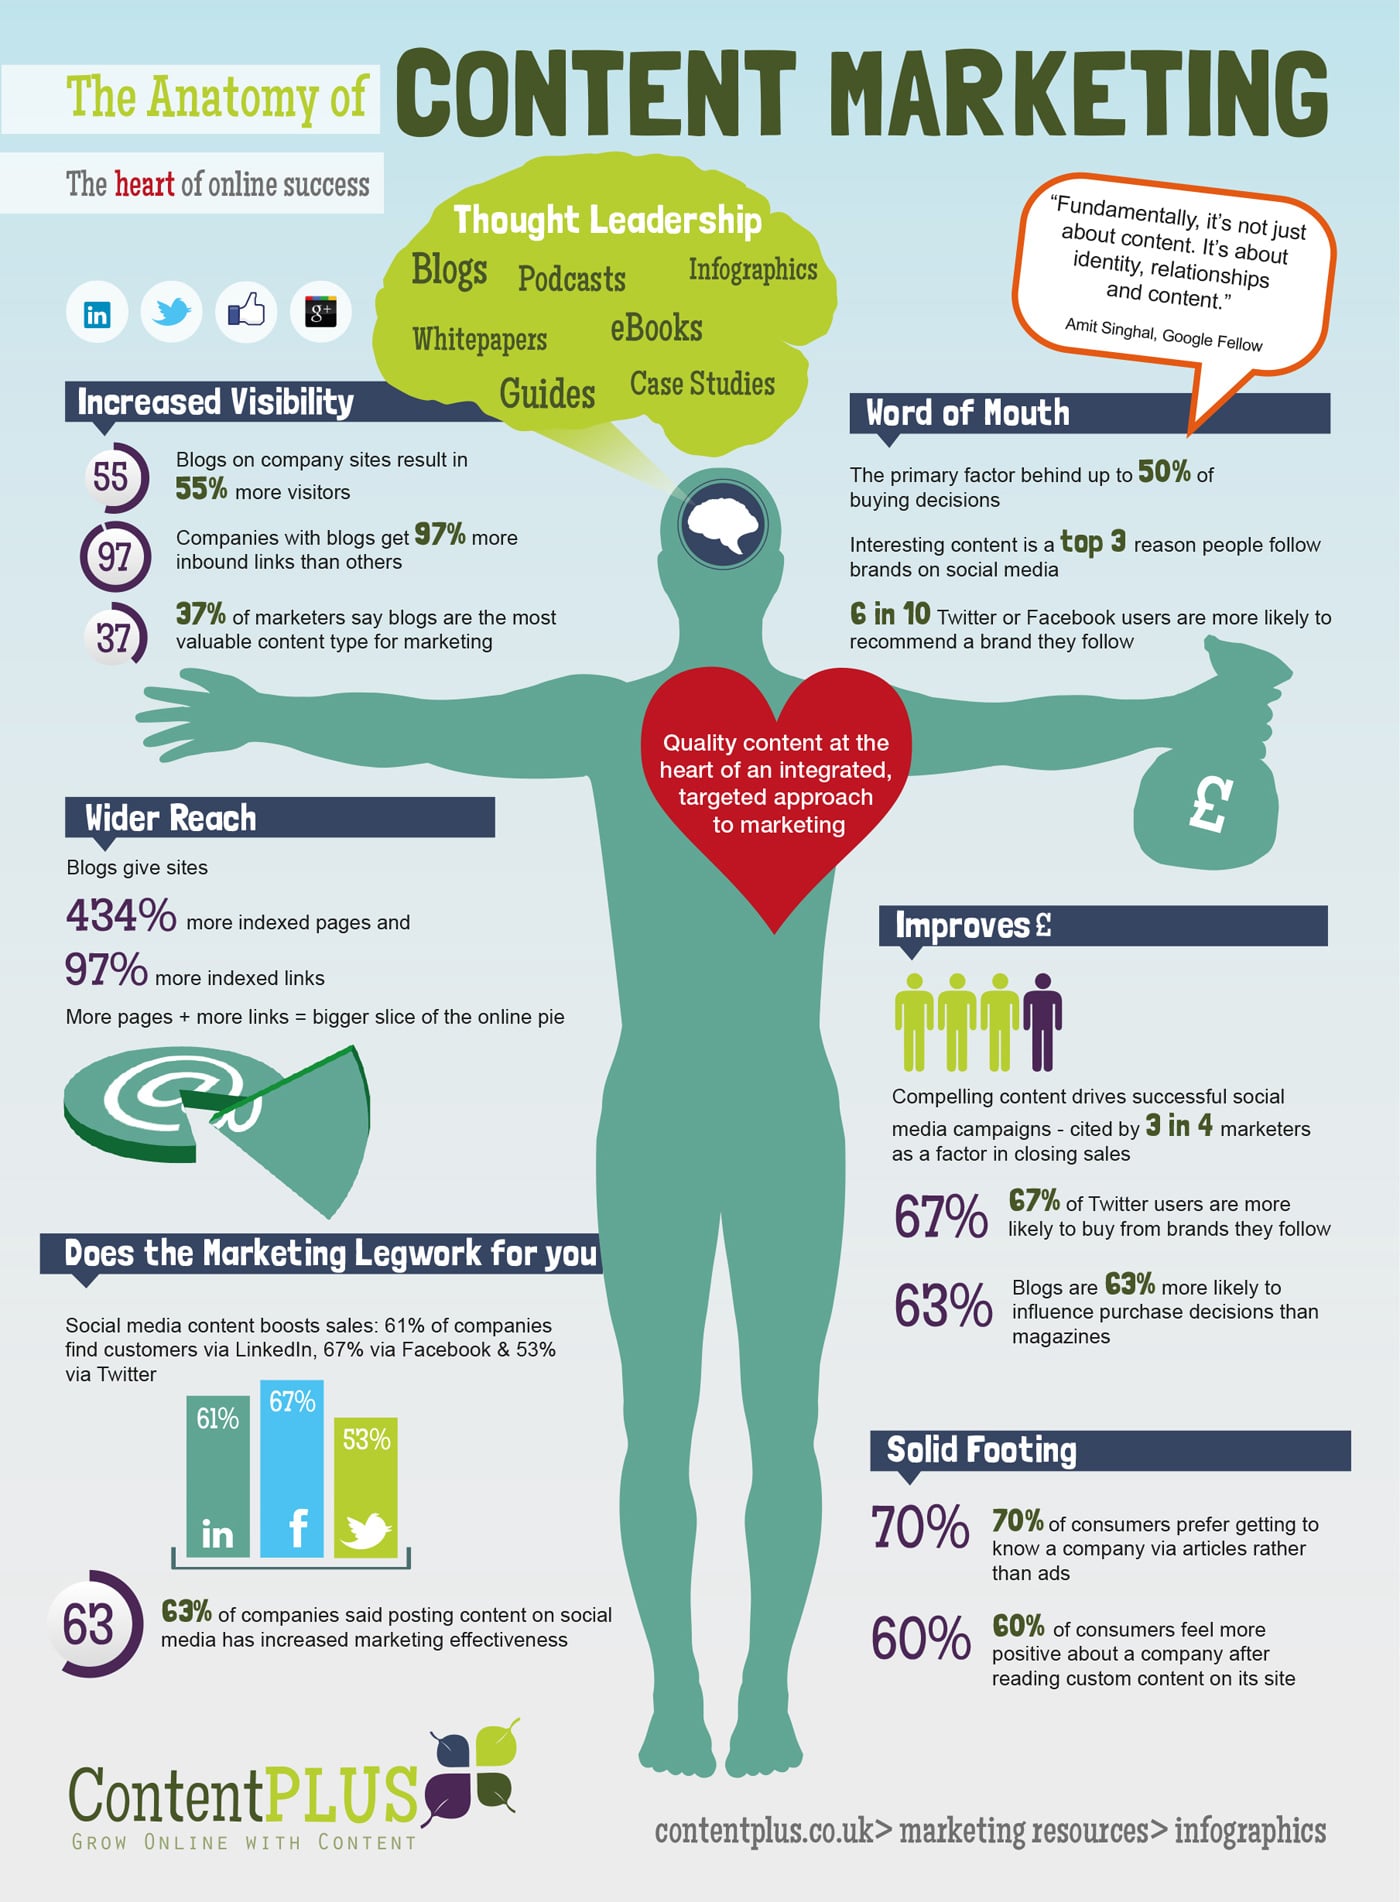 Why Content Marketing Is At The Heart Of Online Success [Infographic]